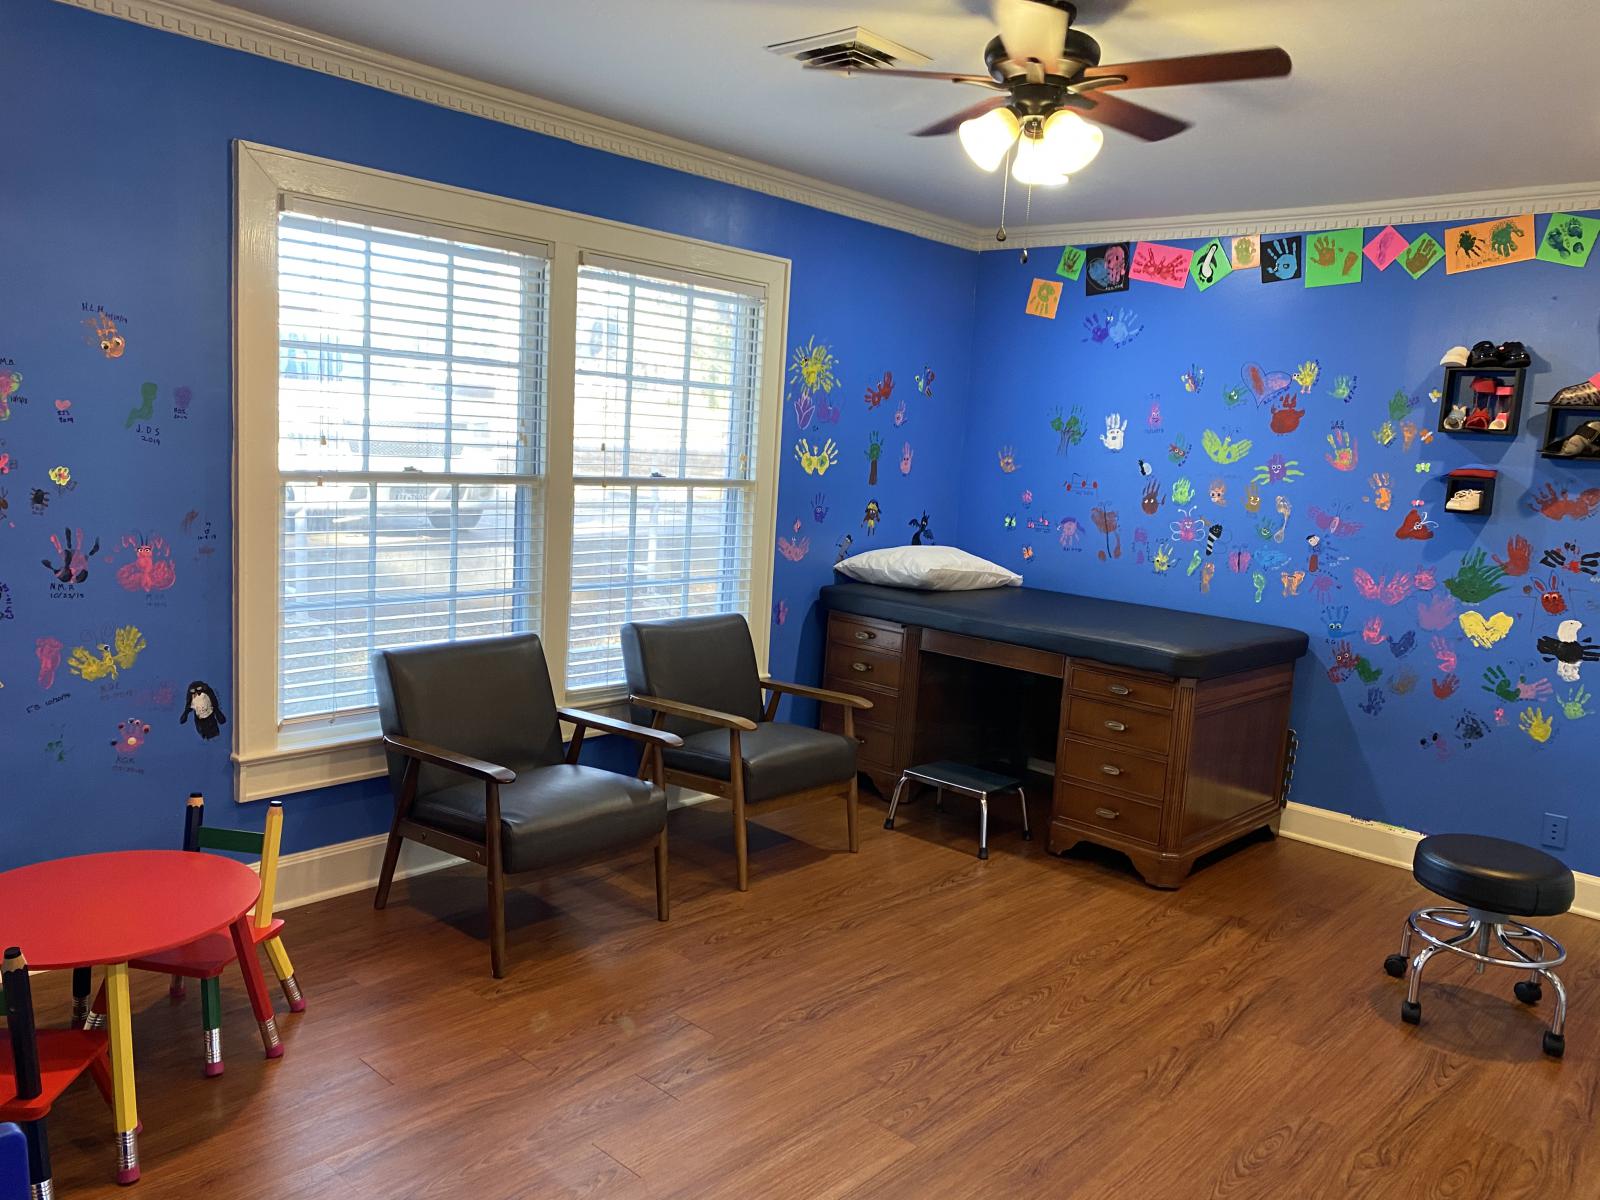 Pediatric room for evaluations and fittings.